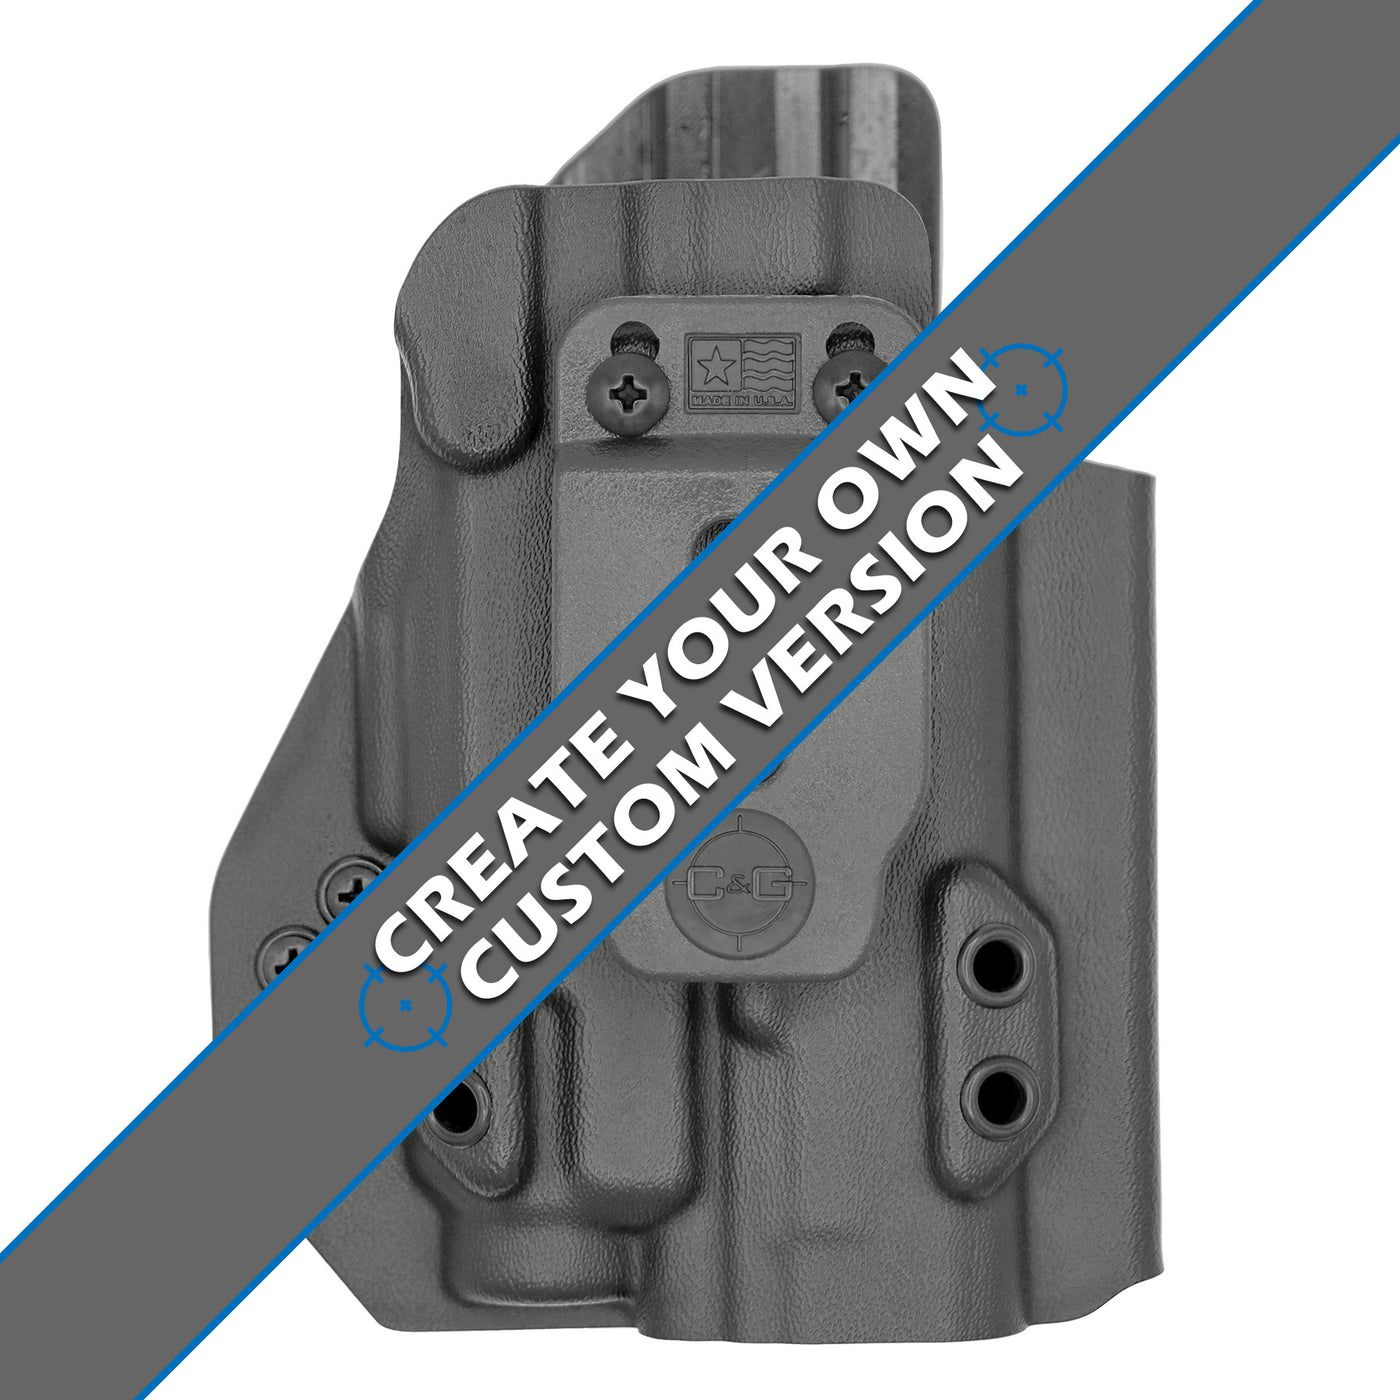 C&G Holsters custom IWB Tactical FN 509/t Streamlight TLR7/a